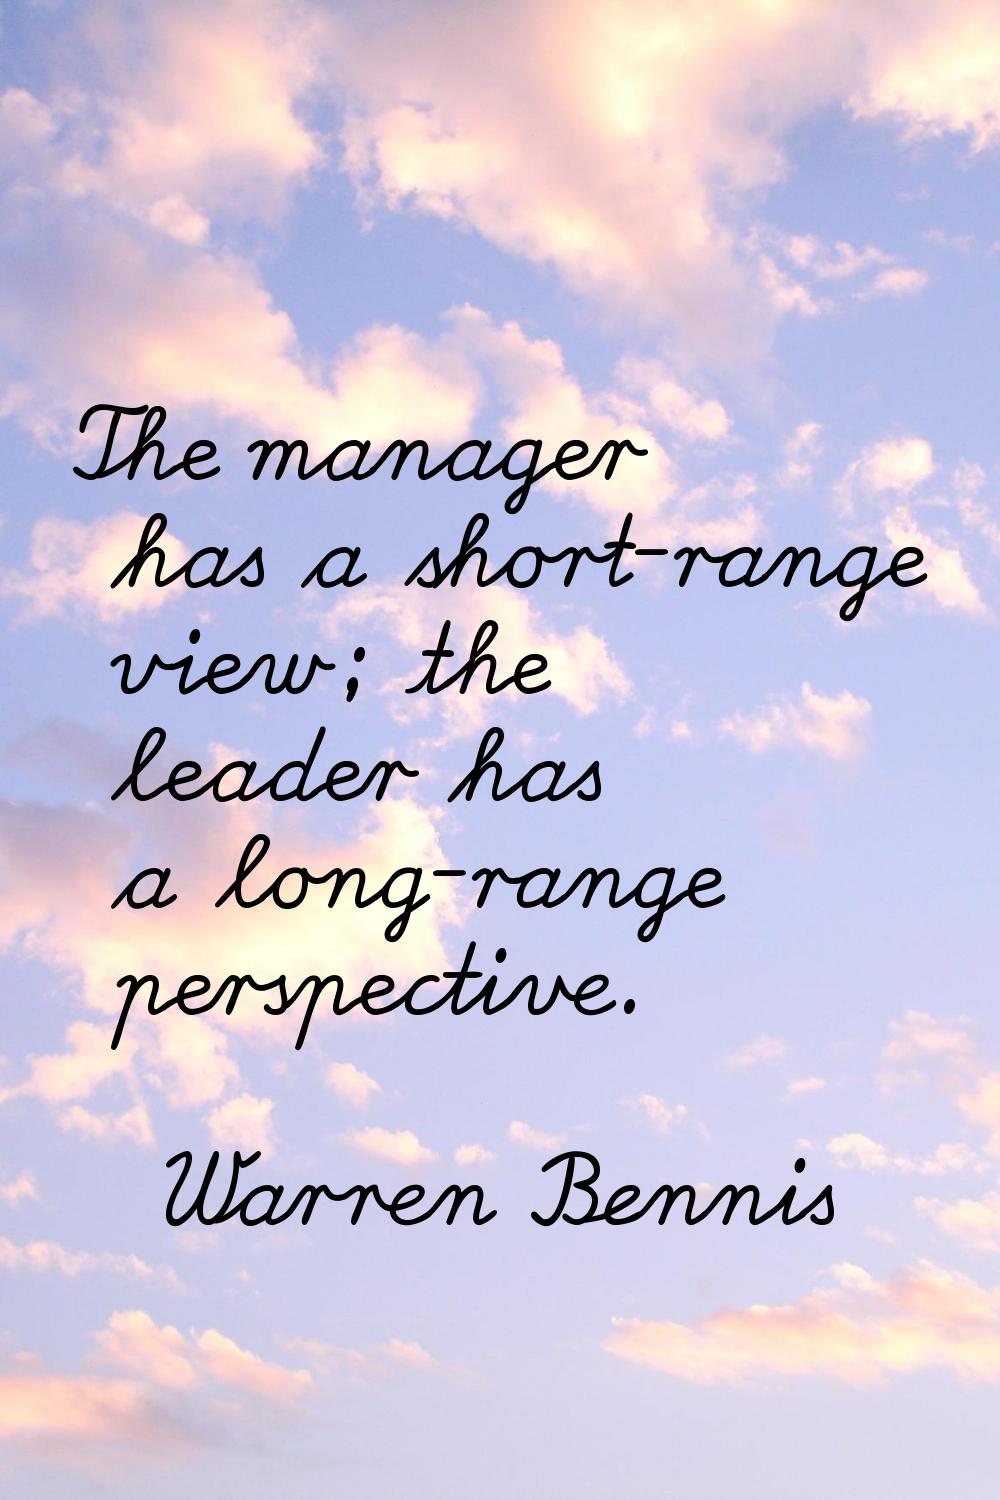 The manager has a short-range view; the leader has a long-range perspective.